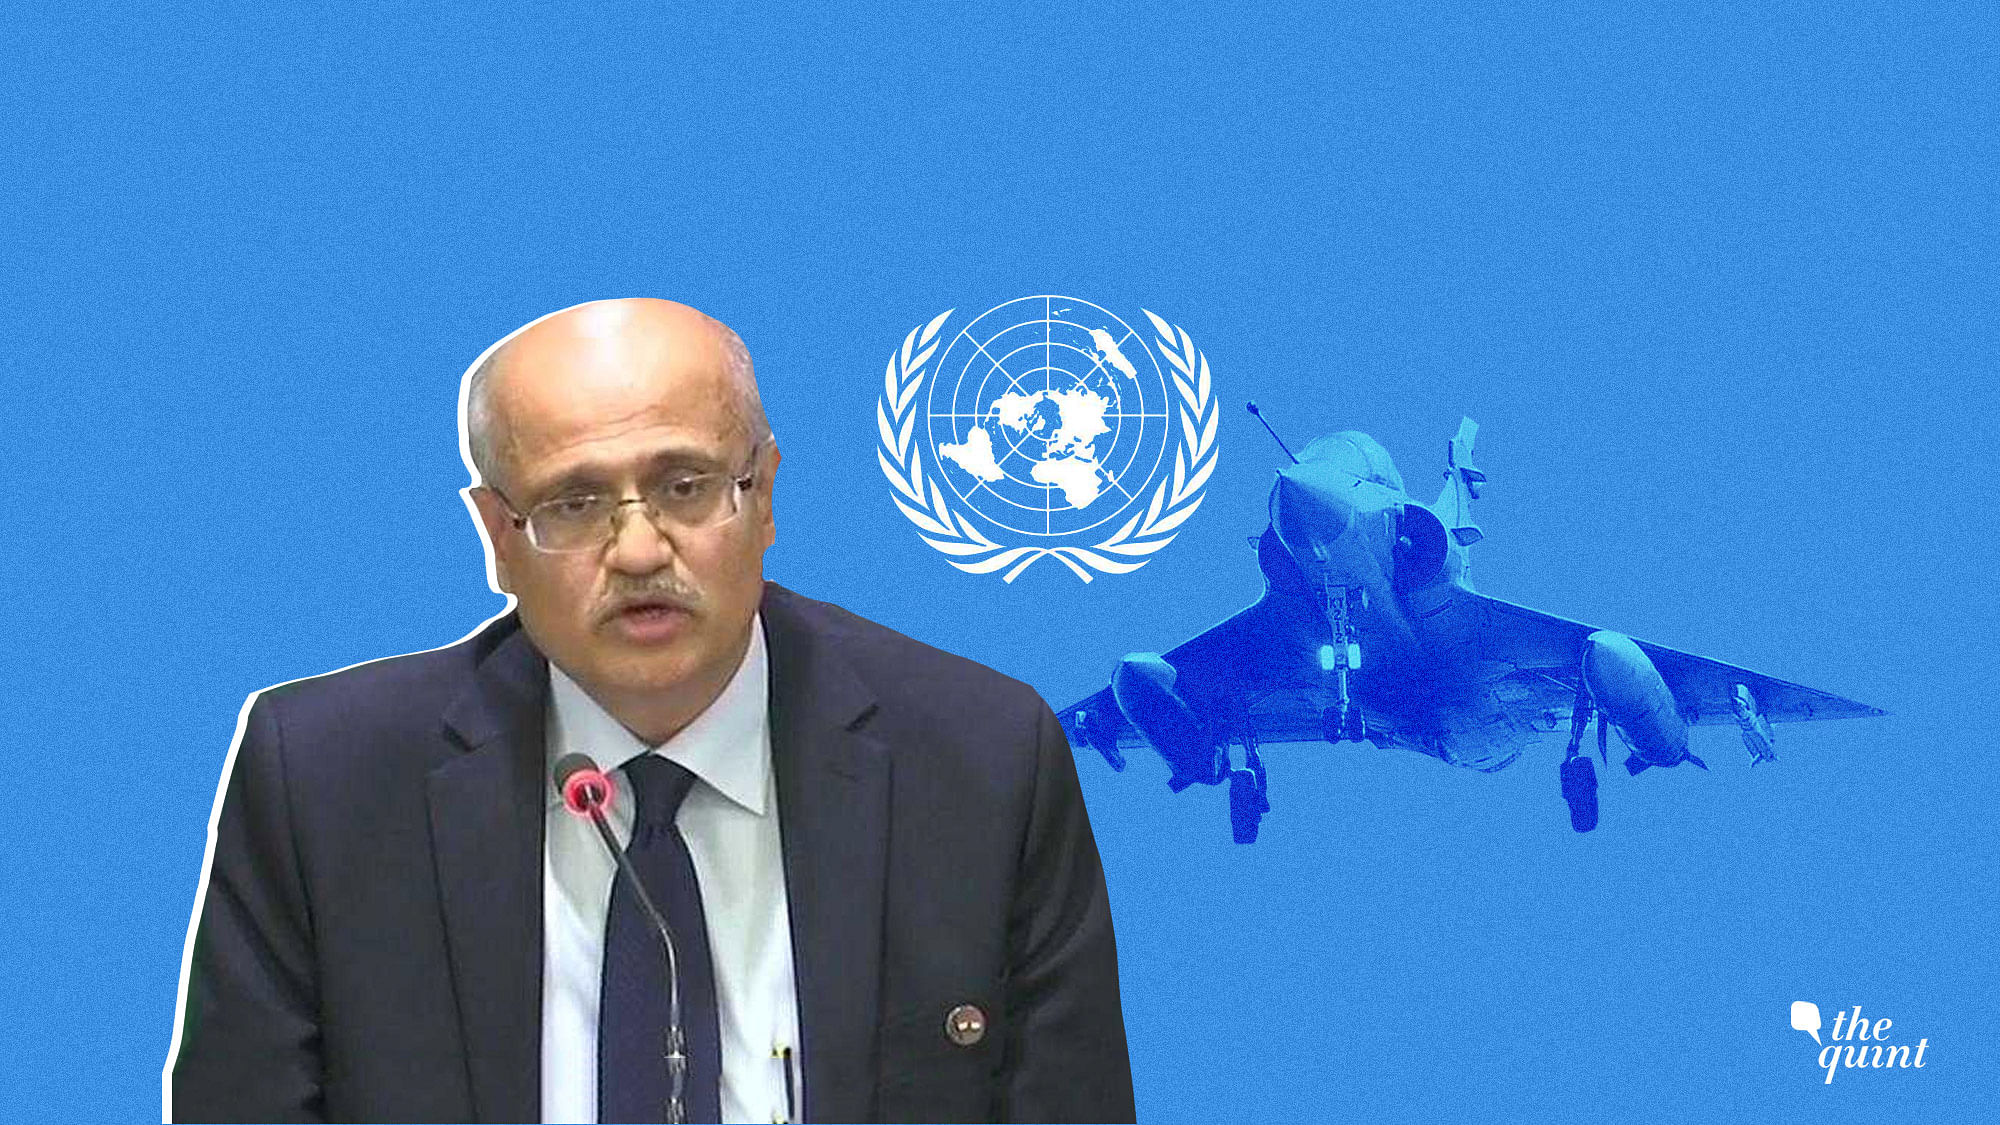  Foreign Secretary Vijay Gokhale confirmed the air strikes by Mirage aircraft against a JeM camp in Balakot.